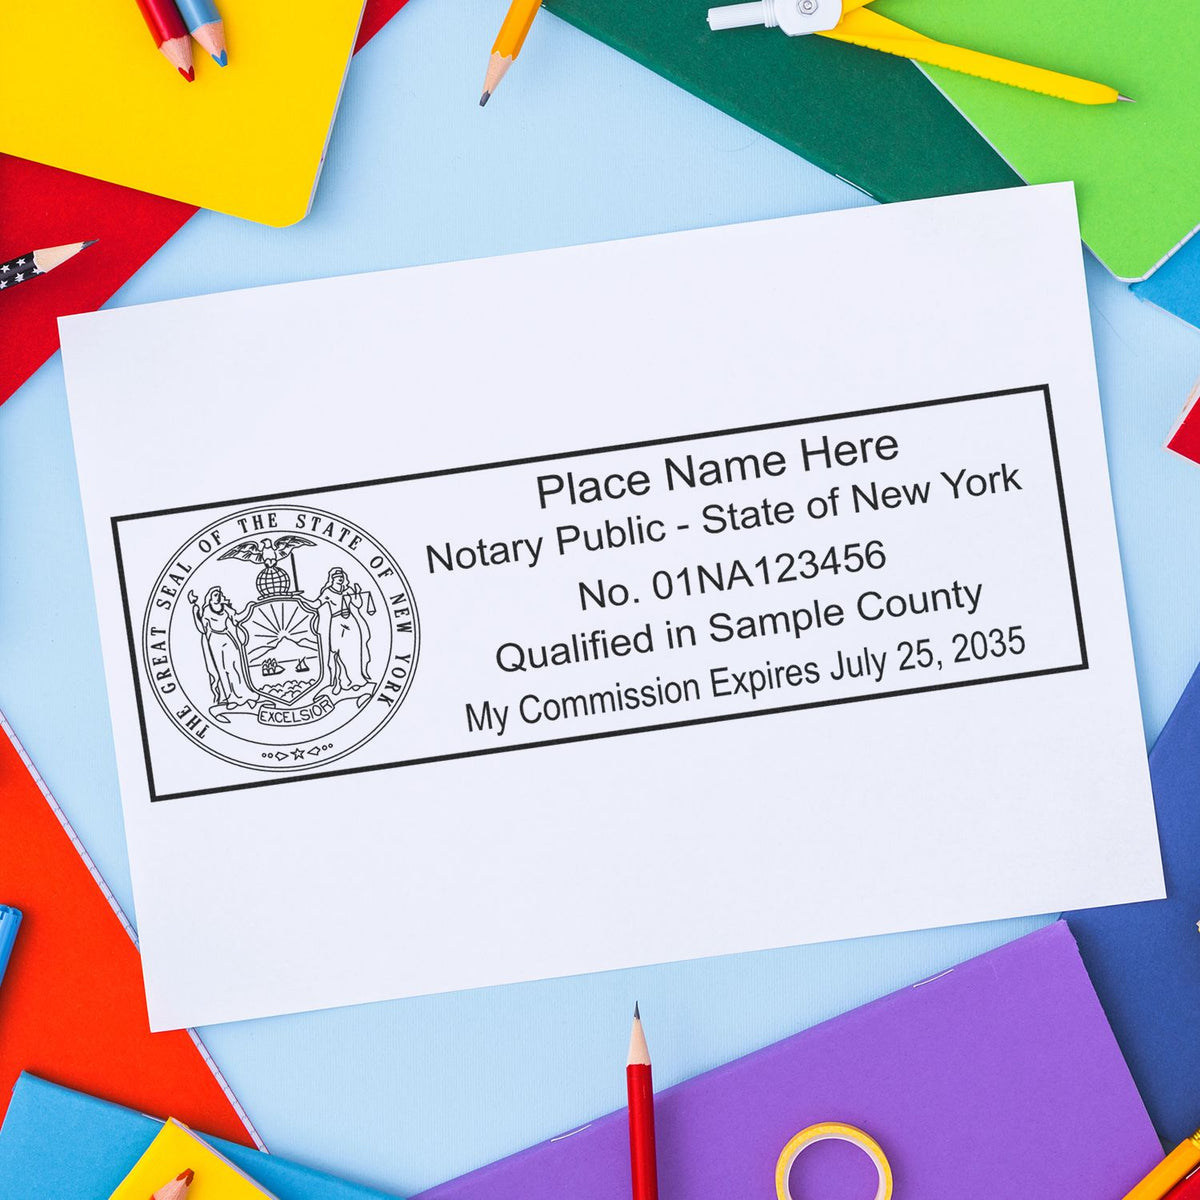 The Super Slim New York Notary Public Stamp stamp impression comes to life with a crisp, detailed photo on paper - showcasing true professional quality.